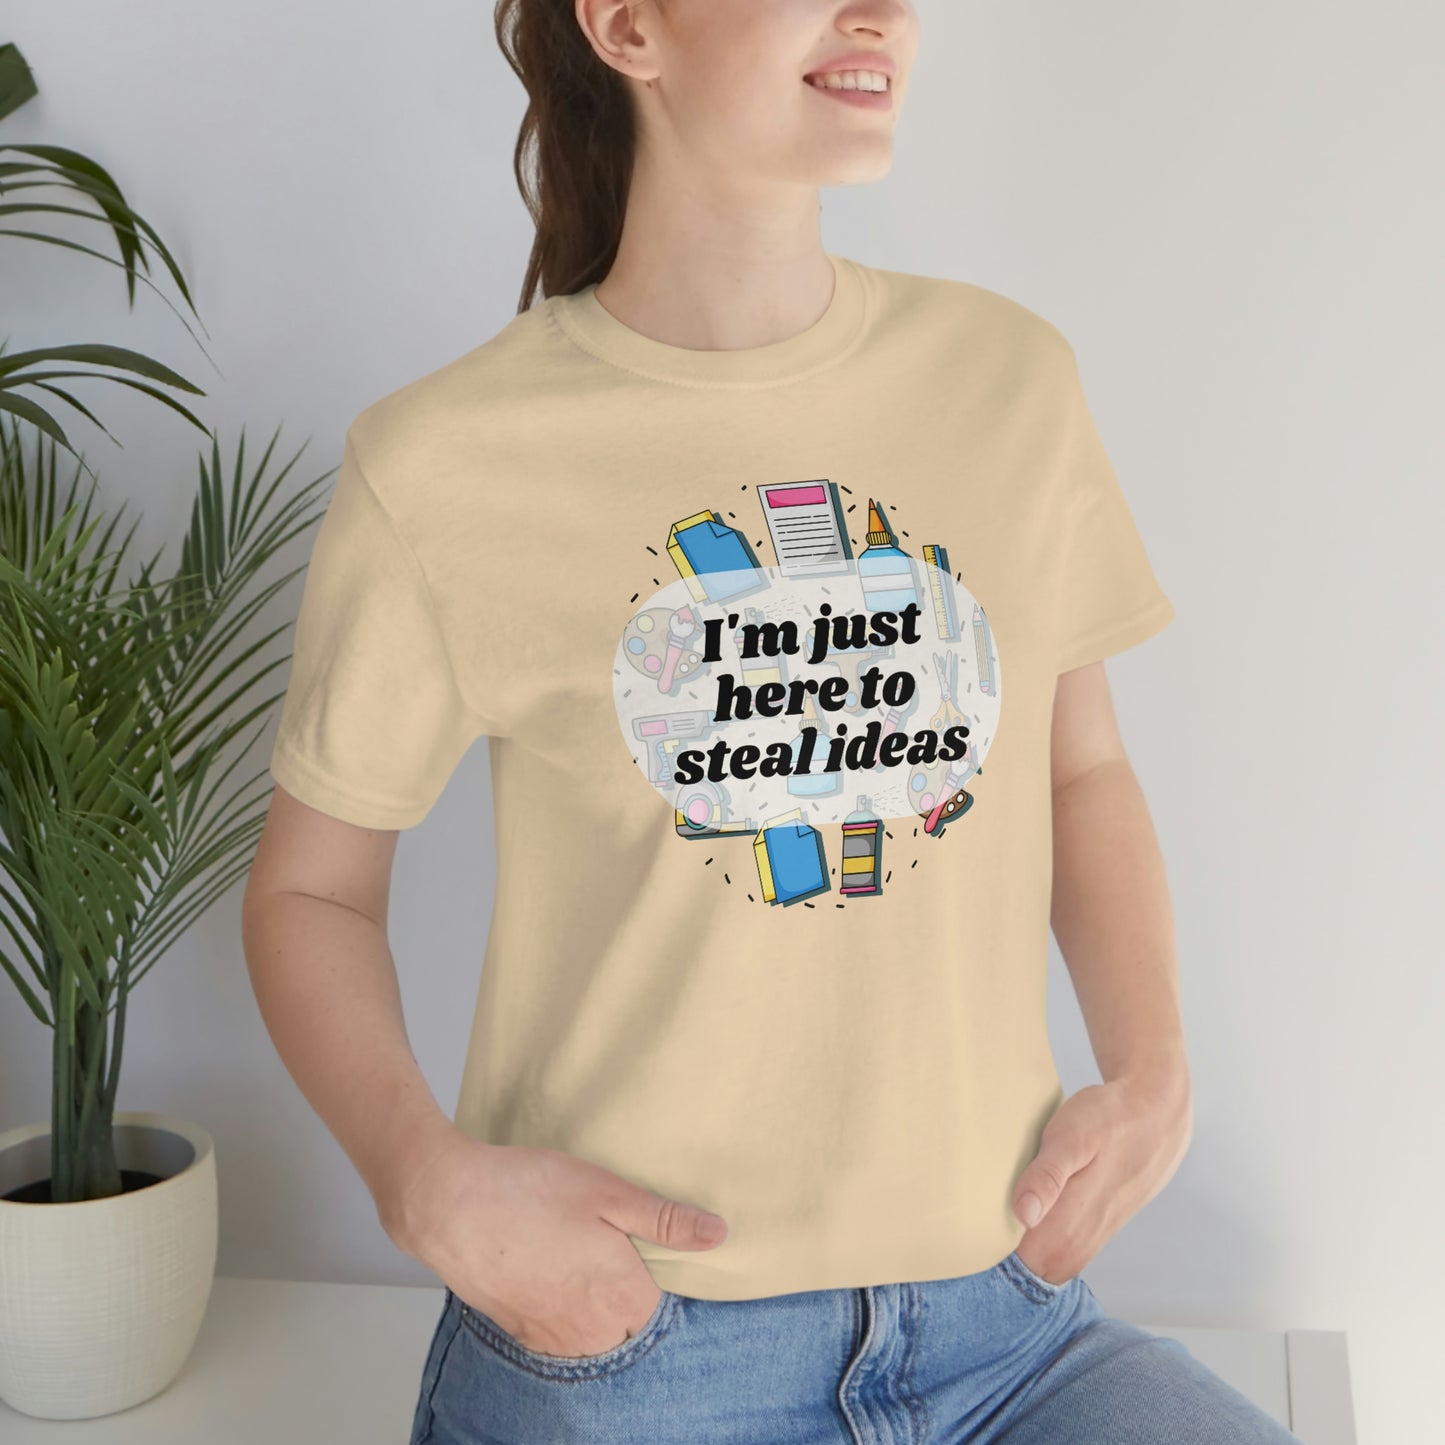 Im just here to steal ideas, funny craft fair shirt, shirt for crafters, multiple colors available!